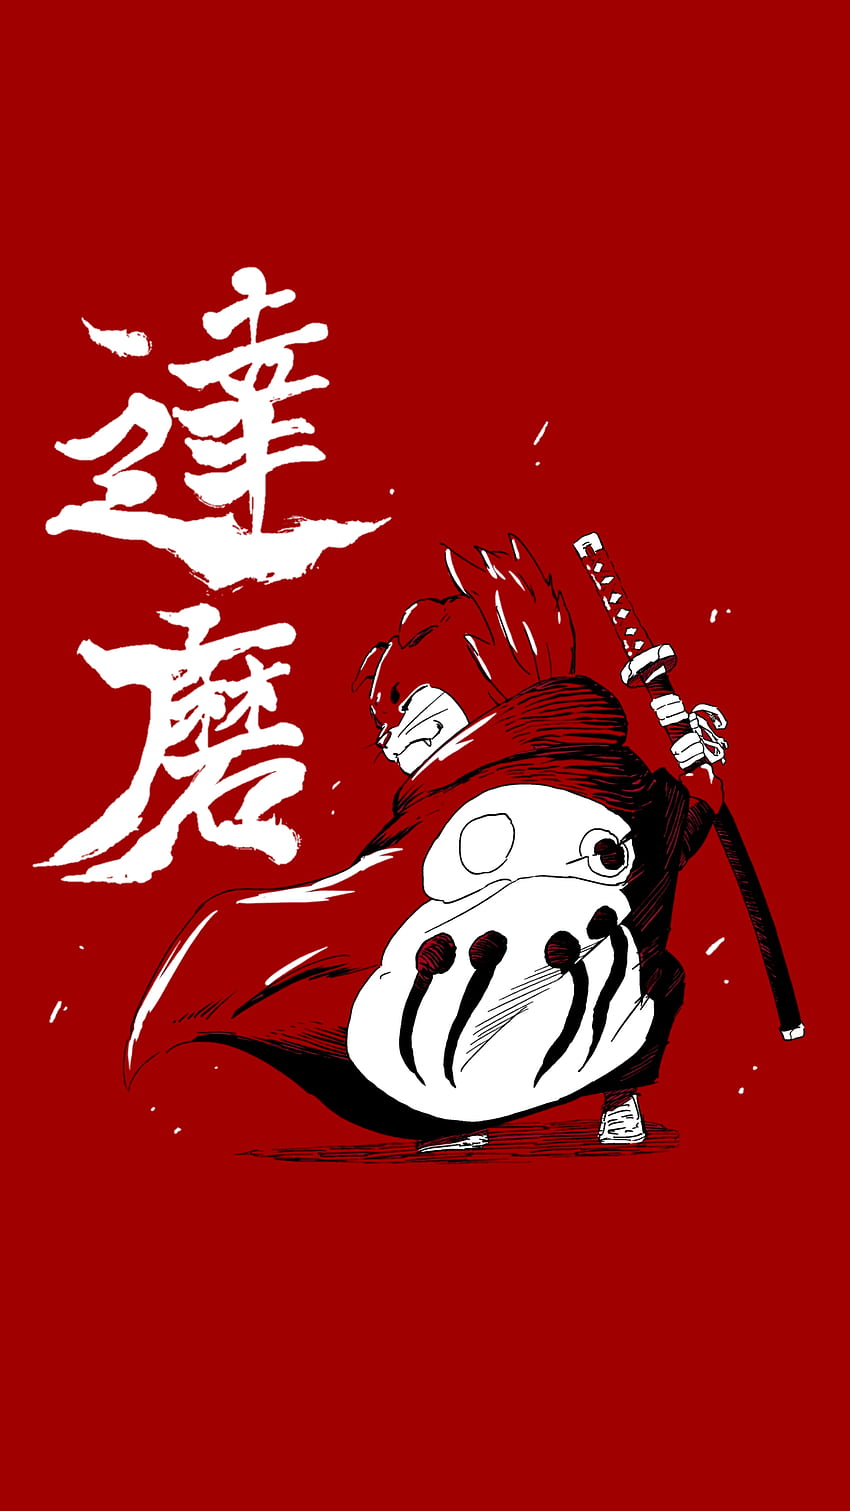 Daruma Fanart I found and cleaned up to be in . The original was too pixelated and looked a bit dark. I fixed the color, lines, object size, position and expanded the HD phone wallpaper